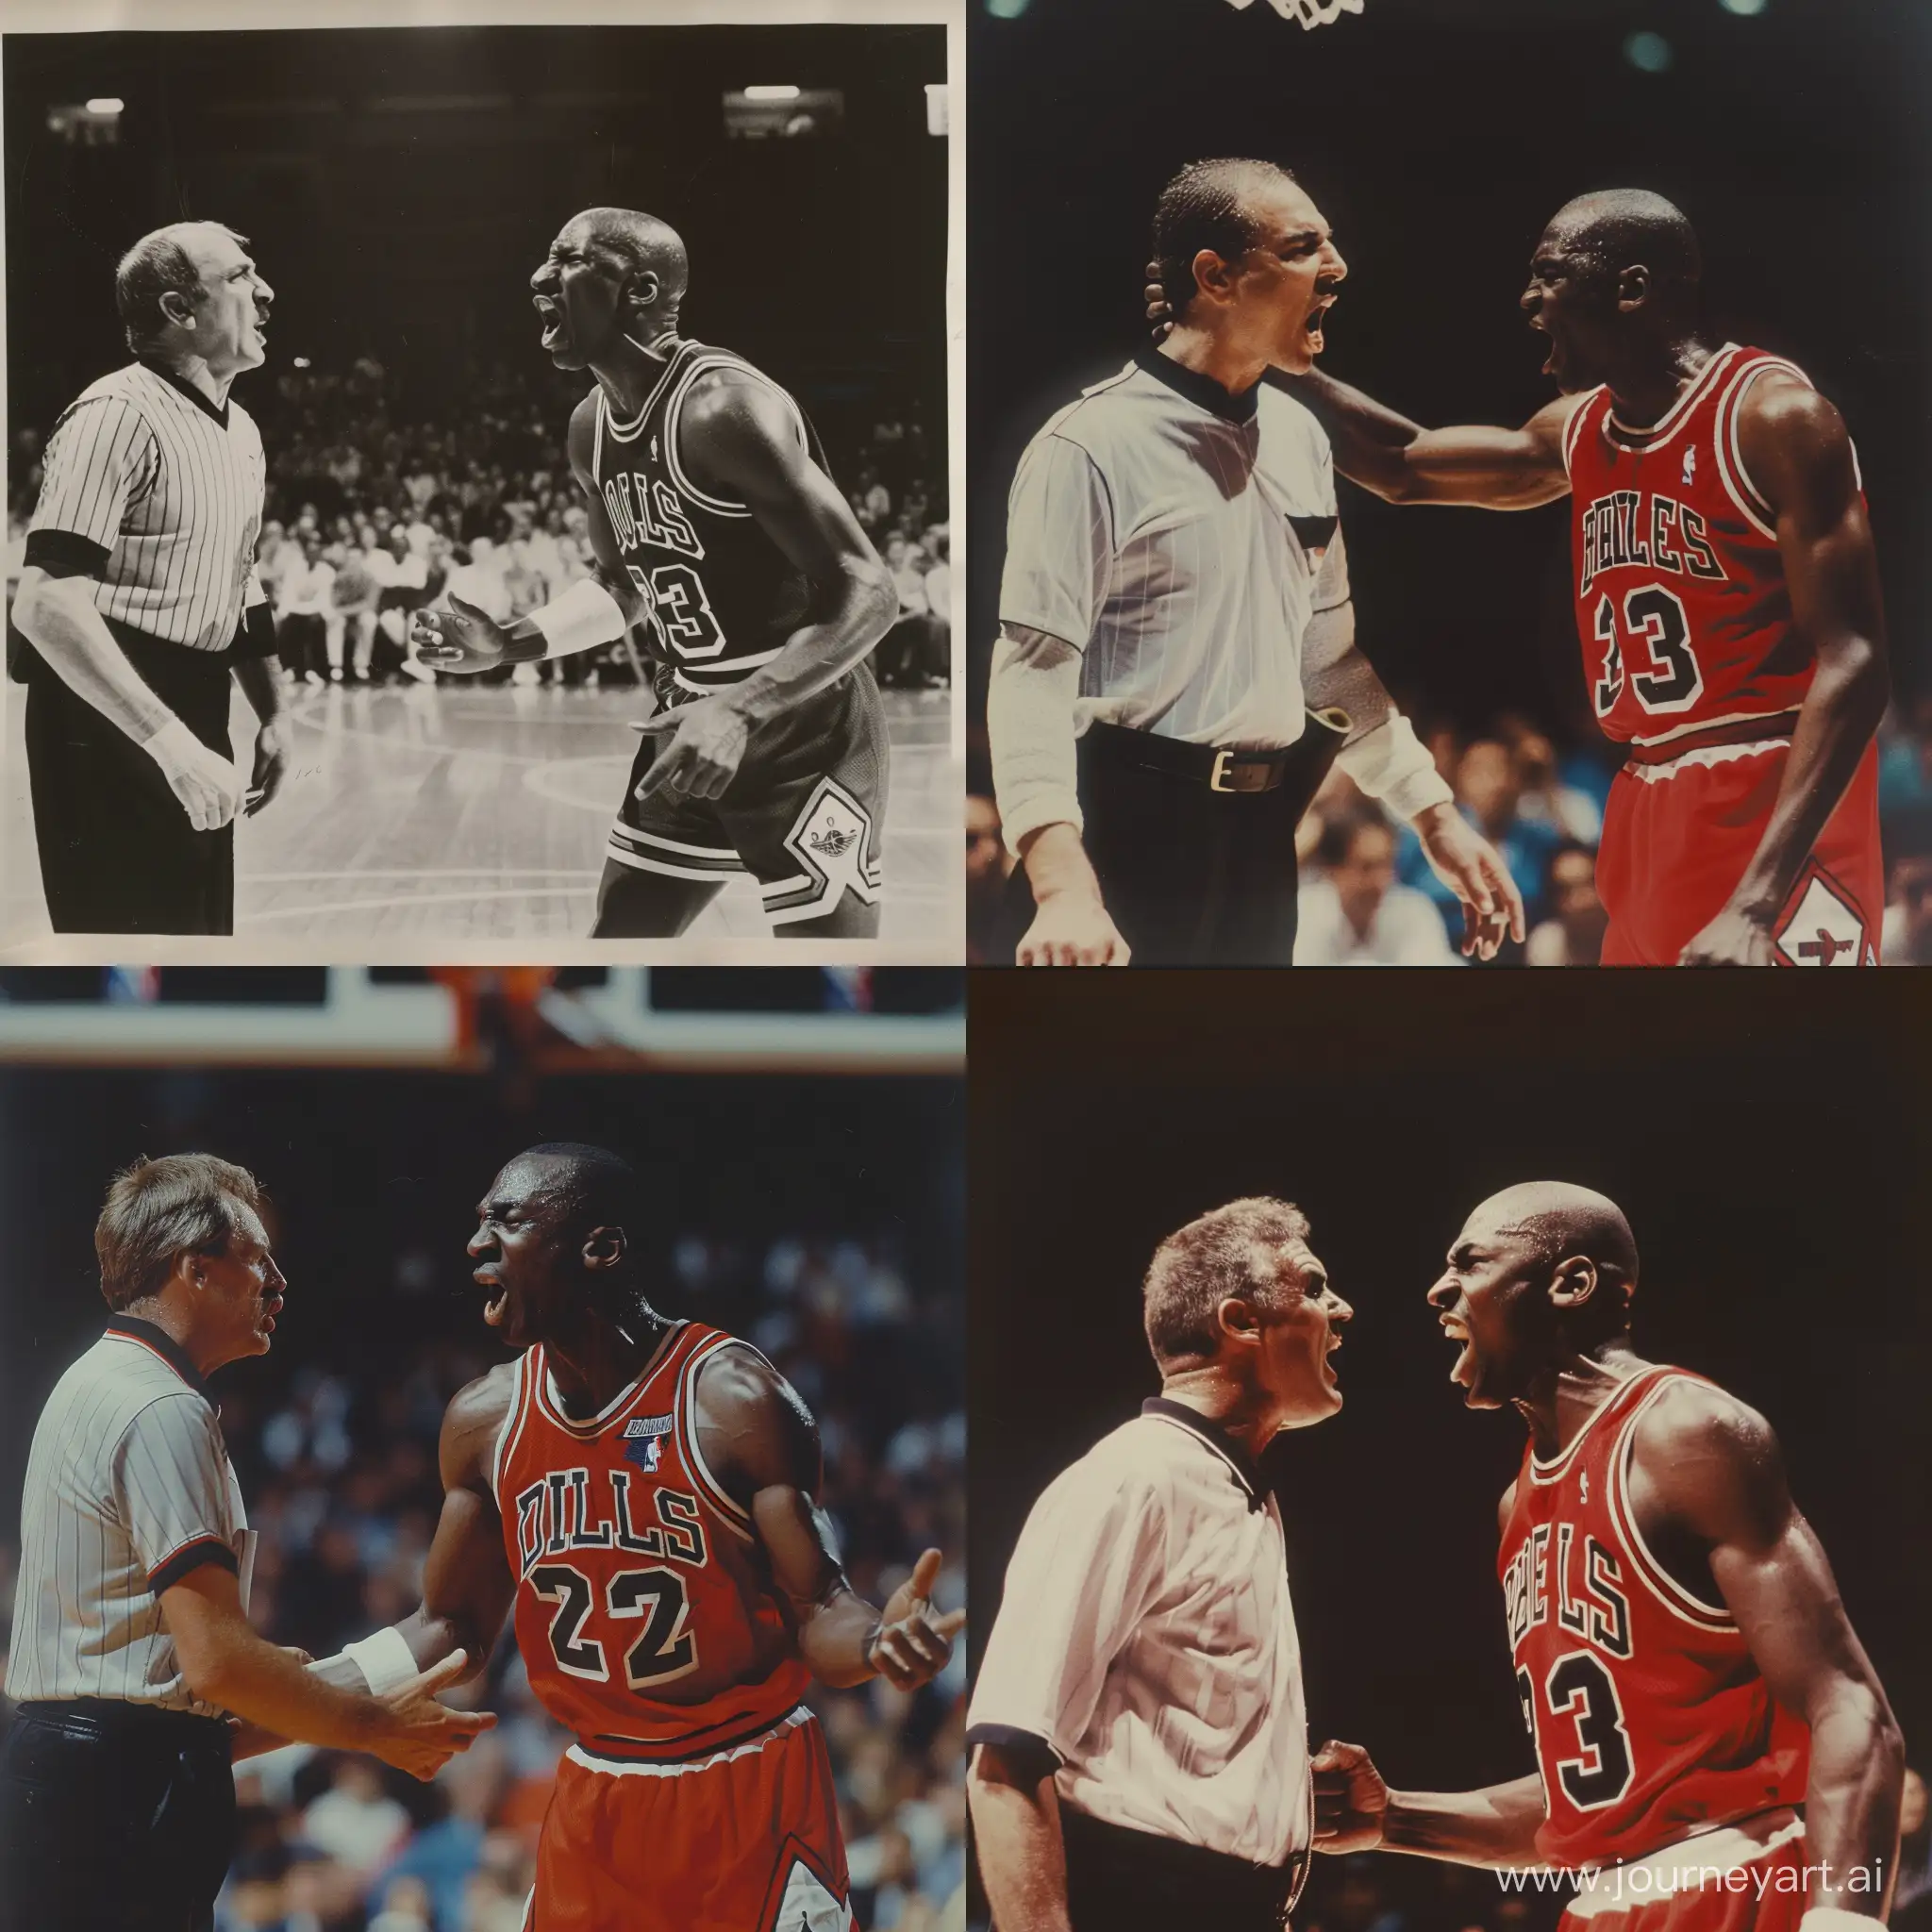 Michael-Jordan-Arguing-with-Referee-in-1980s-Basketball-Game